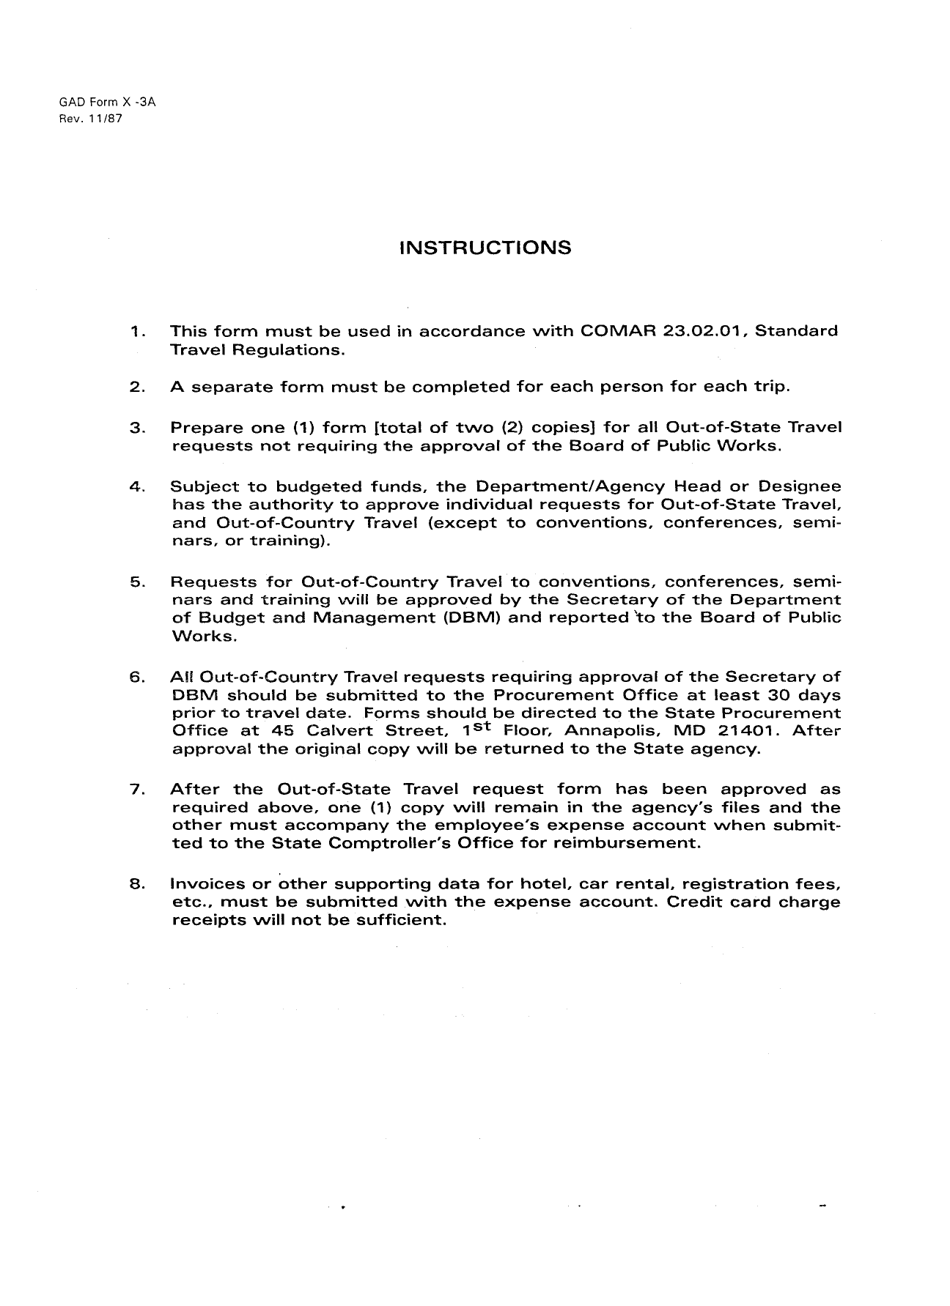 Instructions for Form X-3A Individual Request for Out-of-State Travel - Maryland, Page 1